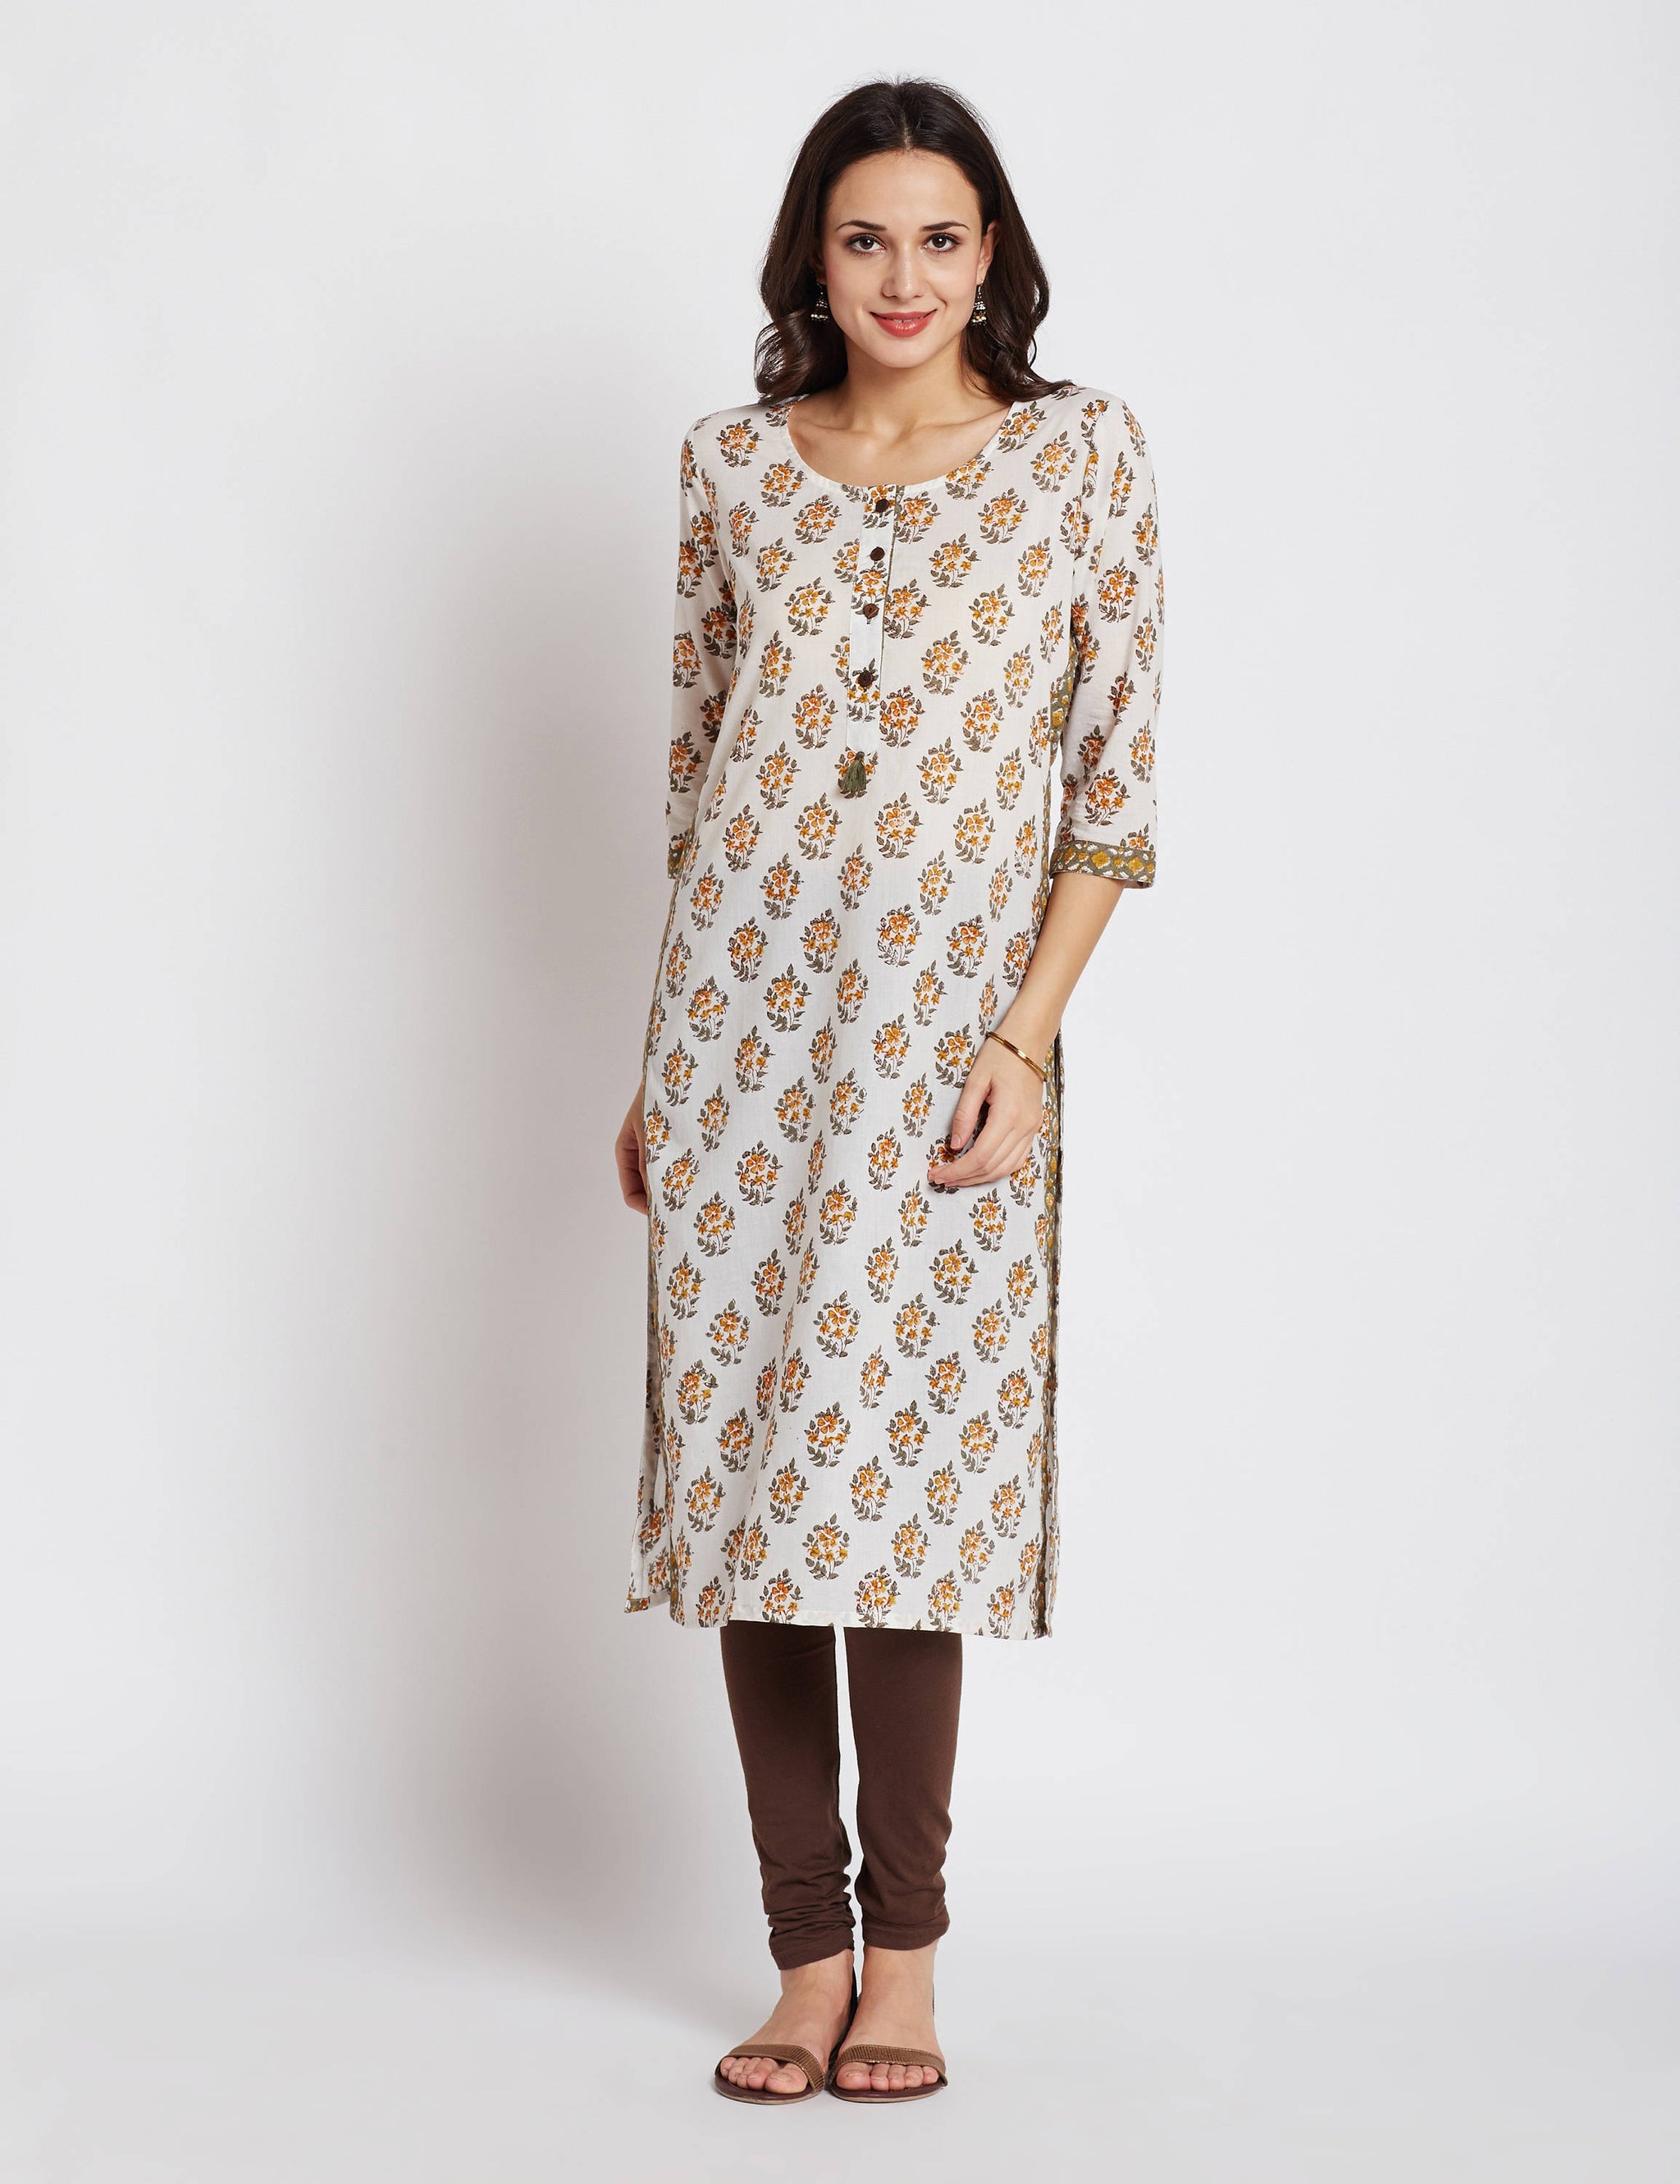 Hand block printed ethnic long Indian kurta with border detailing and front button placket